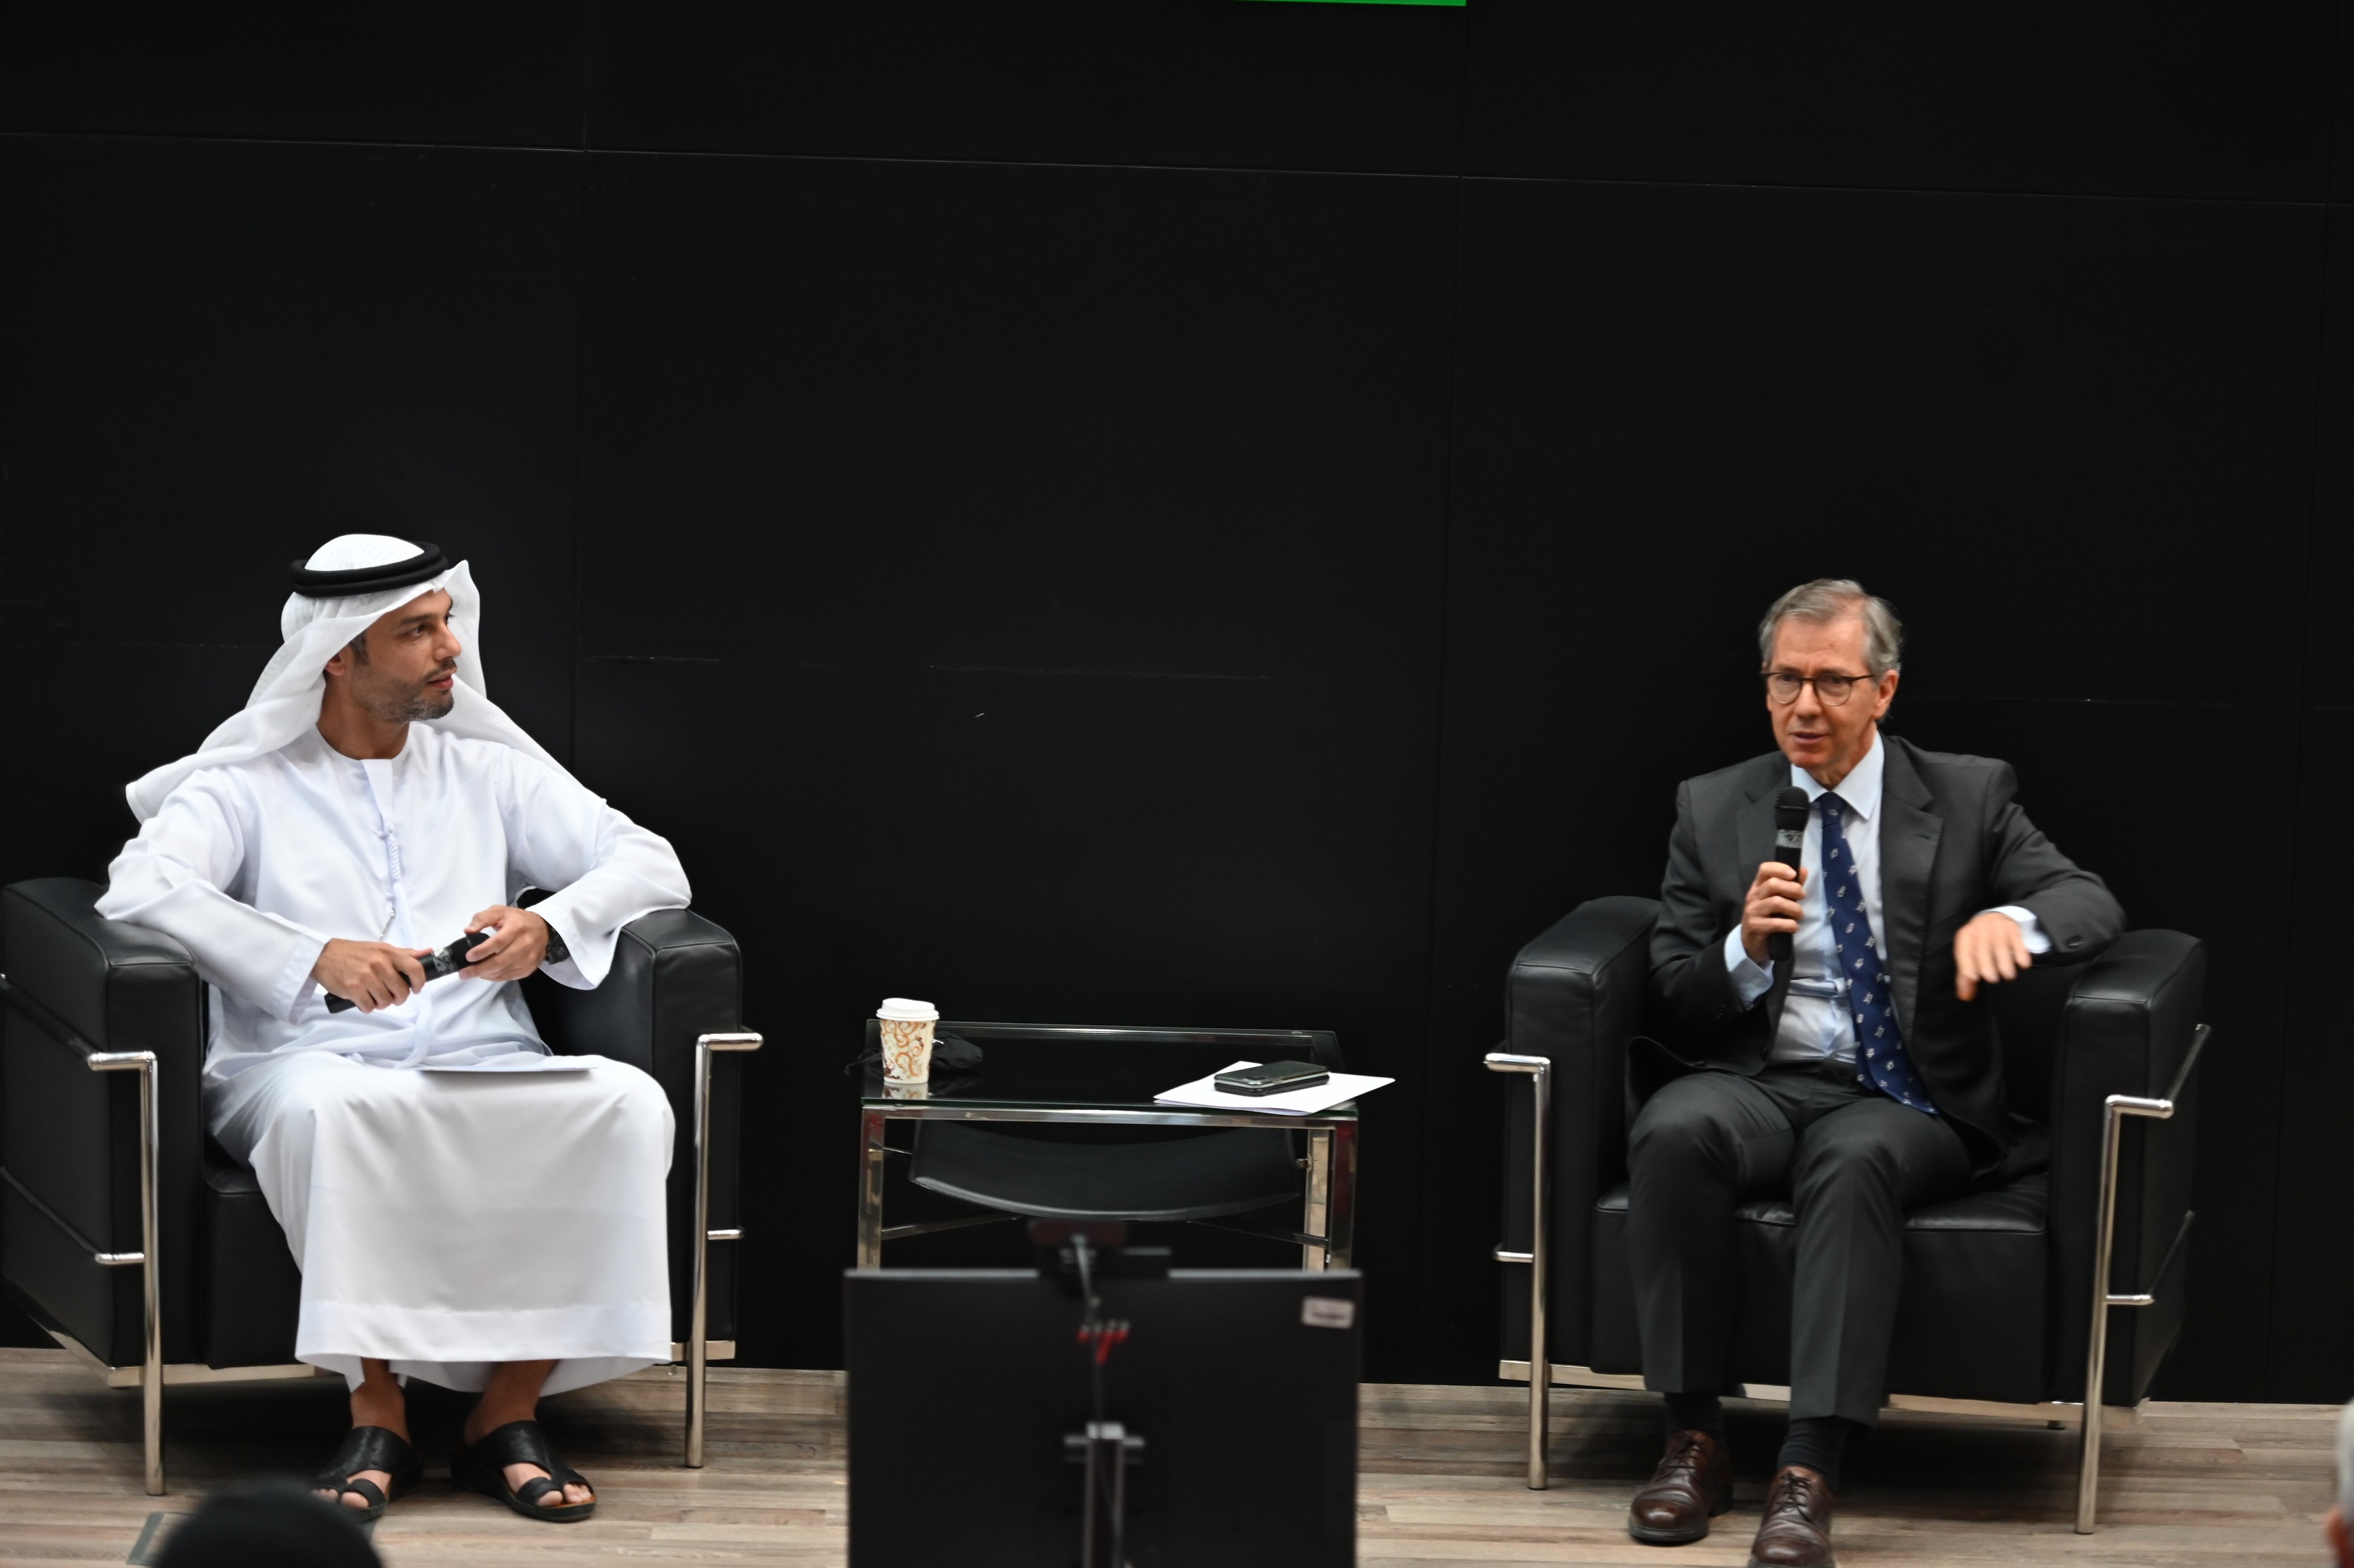 AGDA Hosts UAE’s Newly Appointed Ambassador To Israel